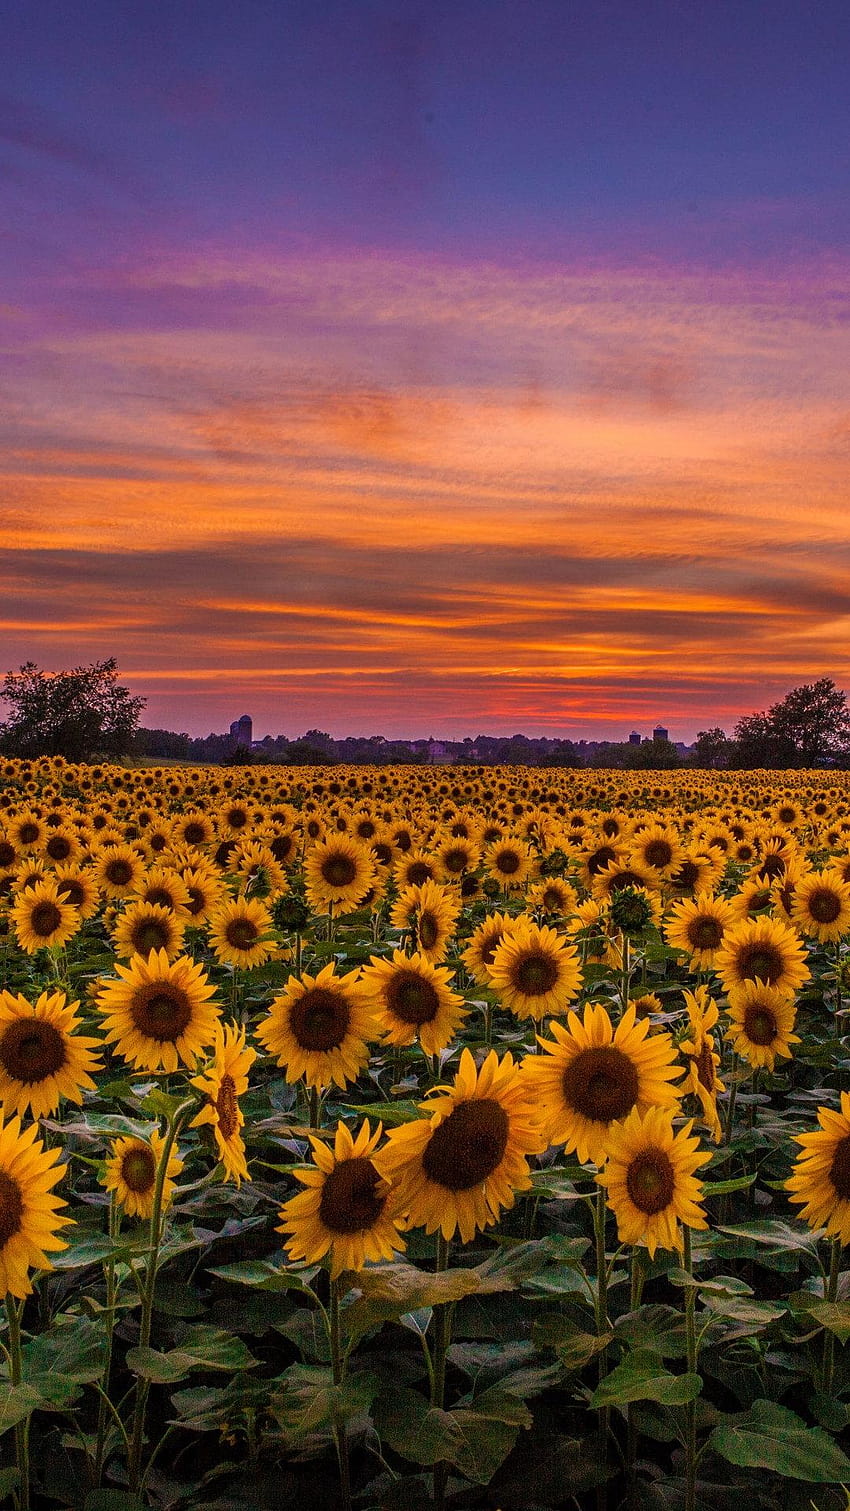 Sunflower field iPhone wallpaper  100 awesome iphone wallpapers